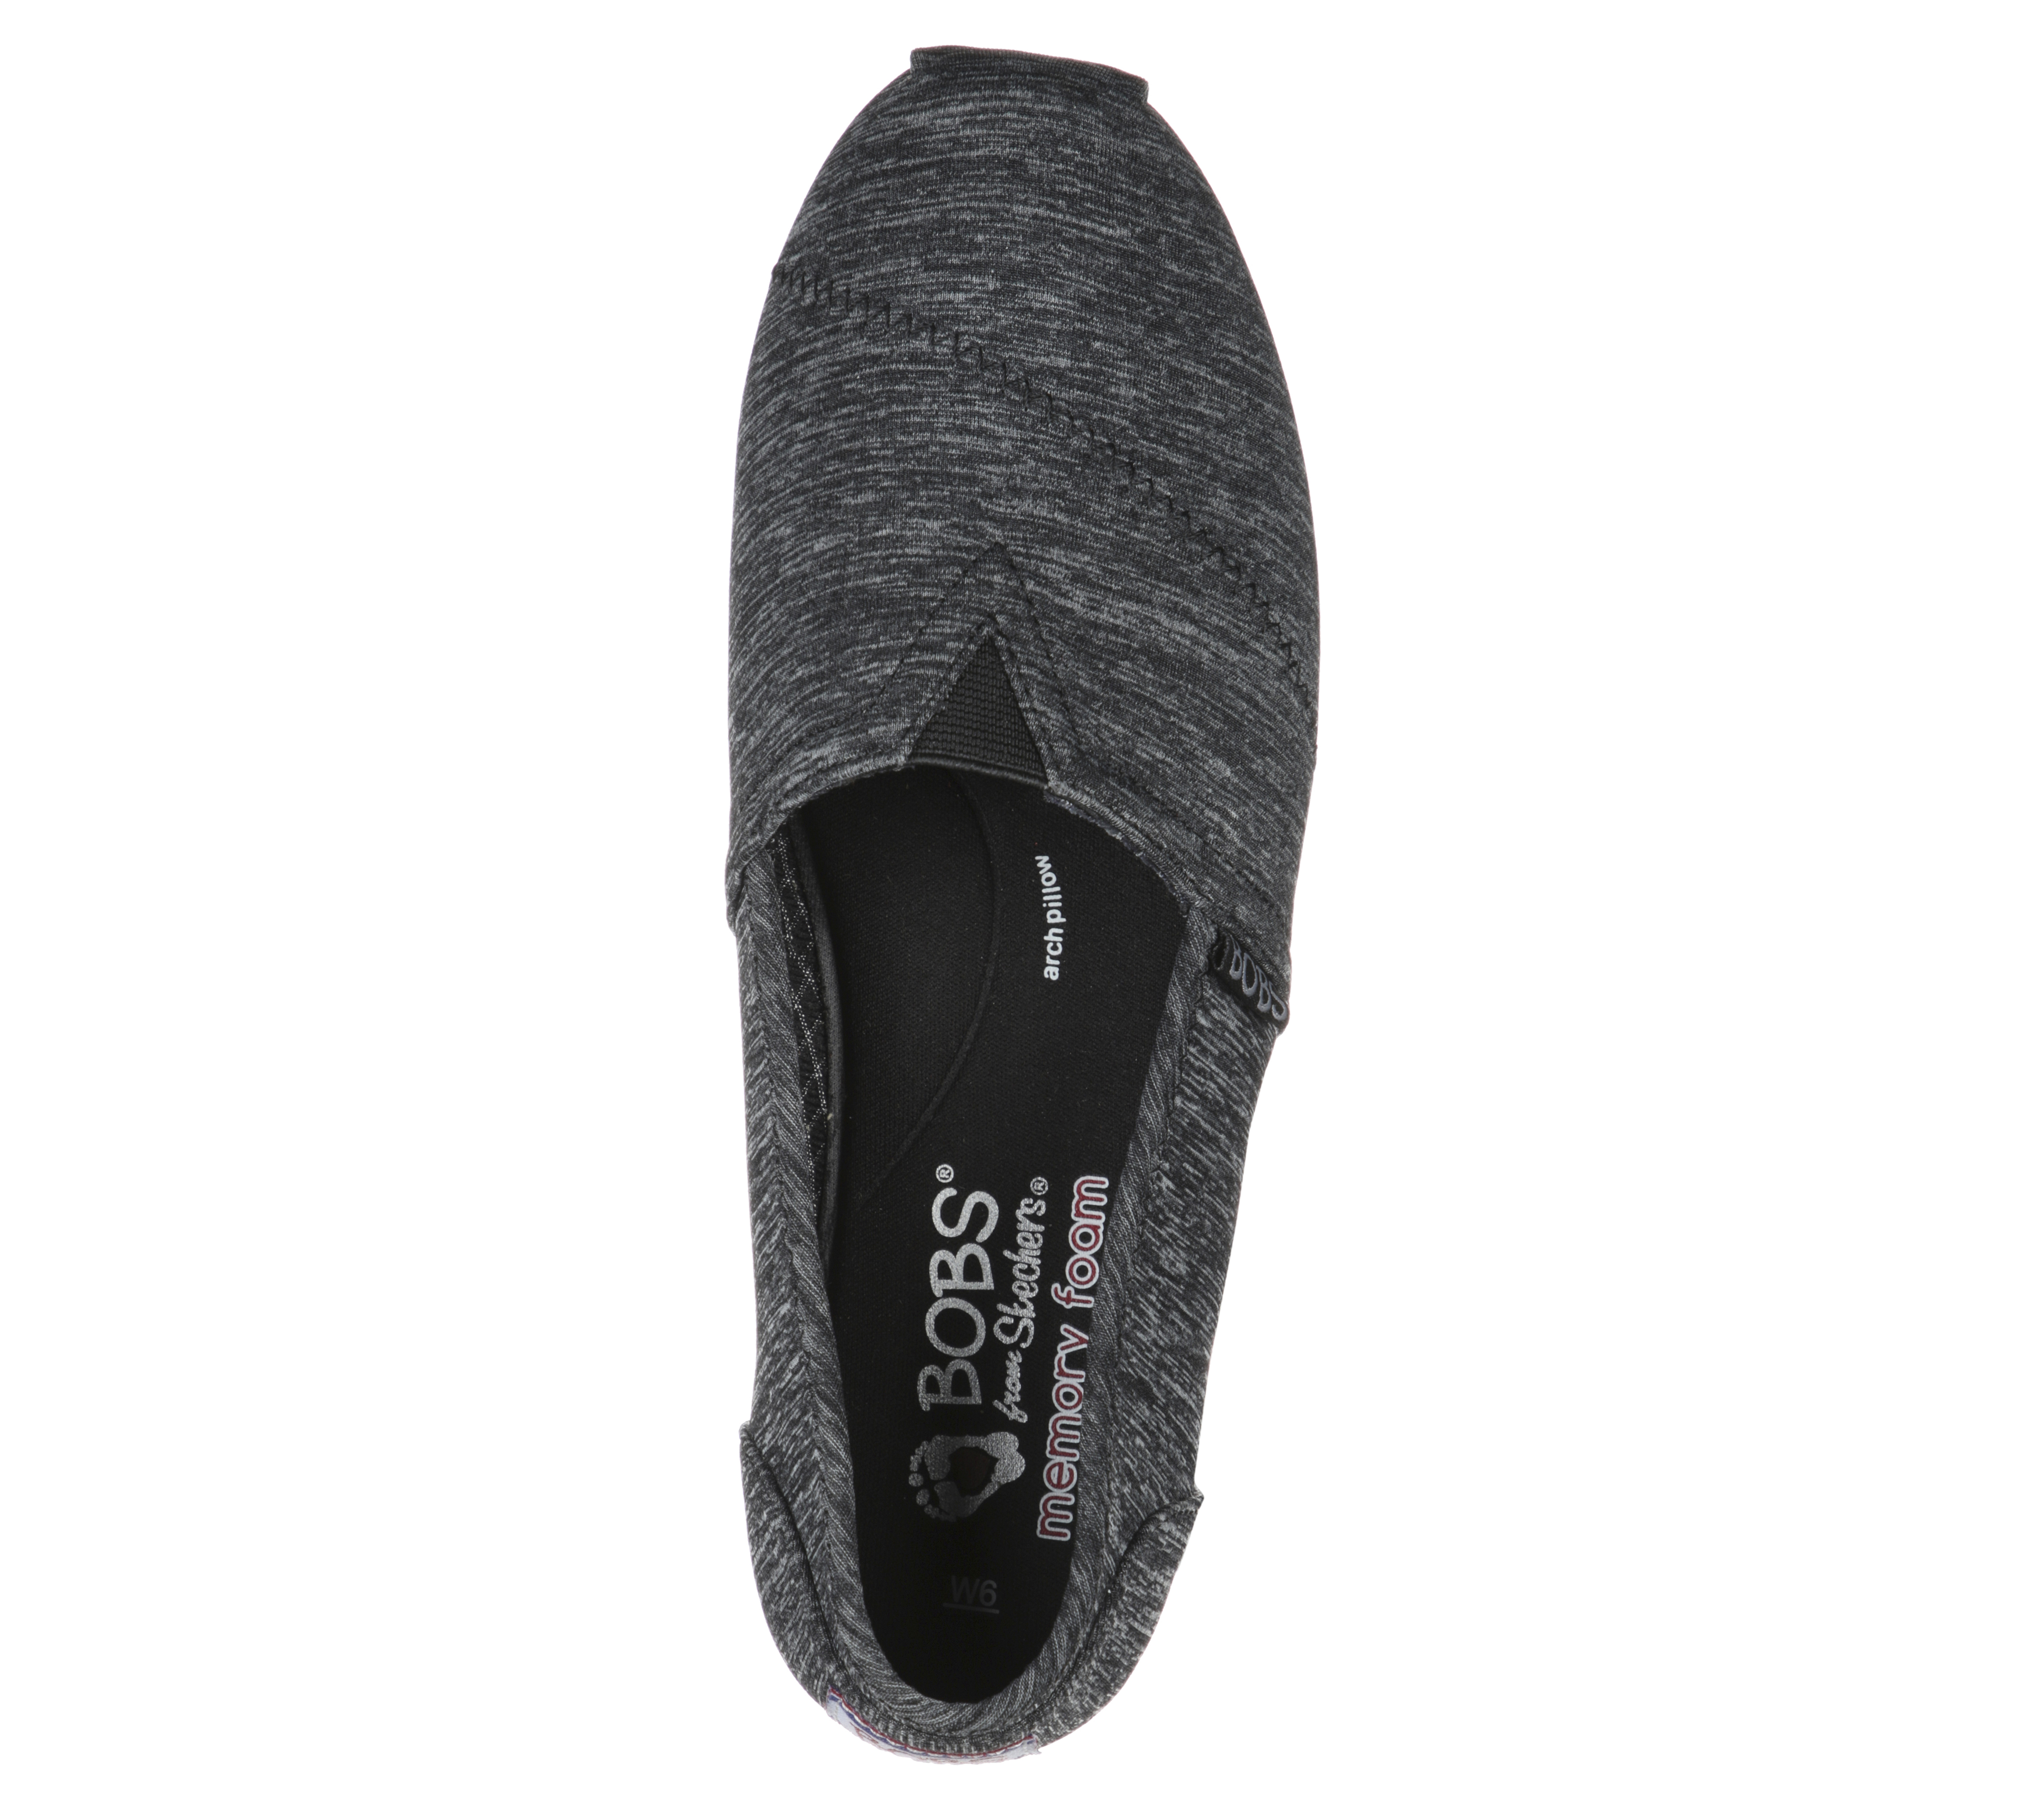 skechers bobs plush express yourself